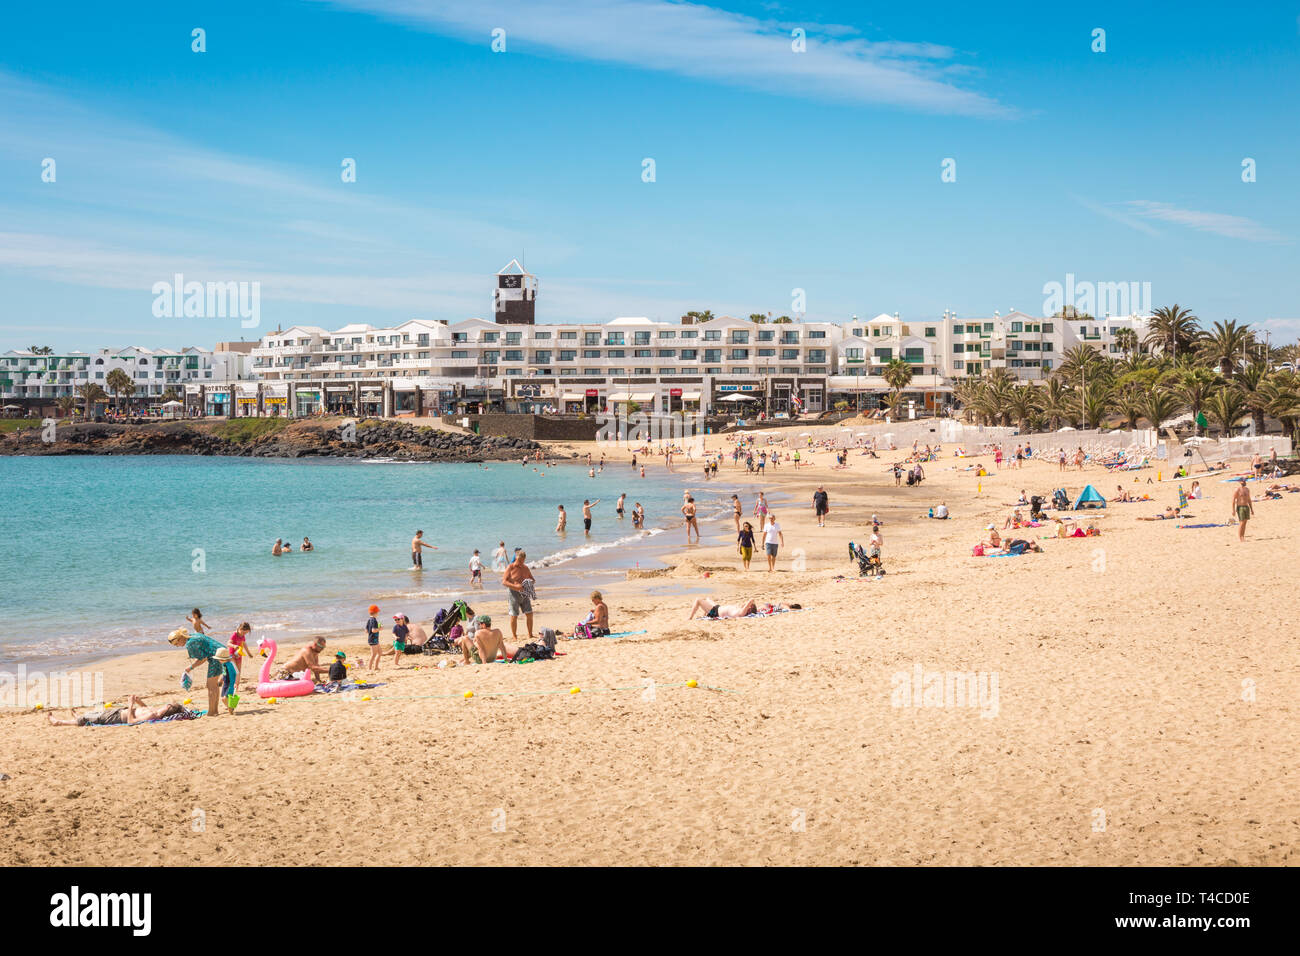 The sandy beach at Costa Teguise, Lanzarote, Canary Islands Stock Photo -  Alamy